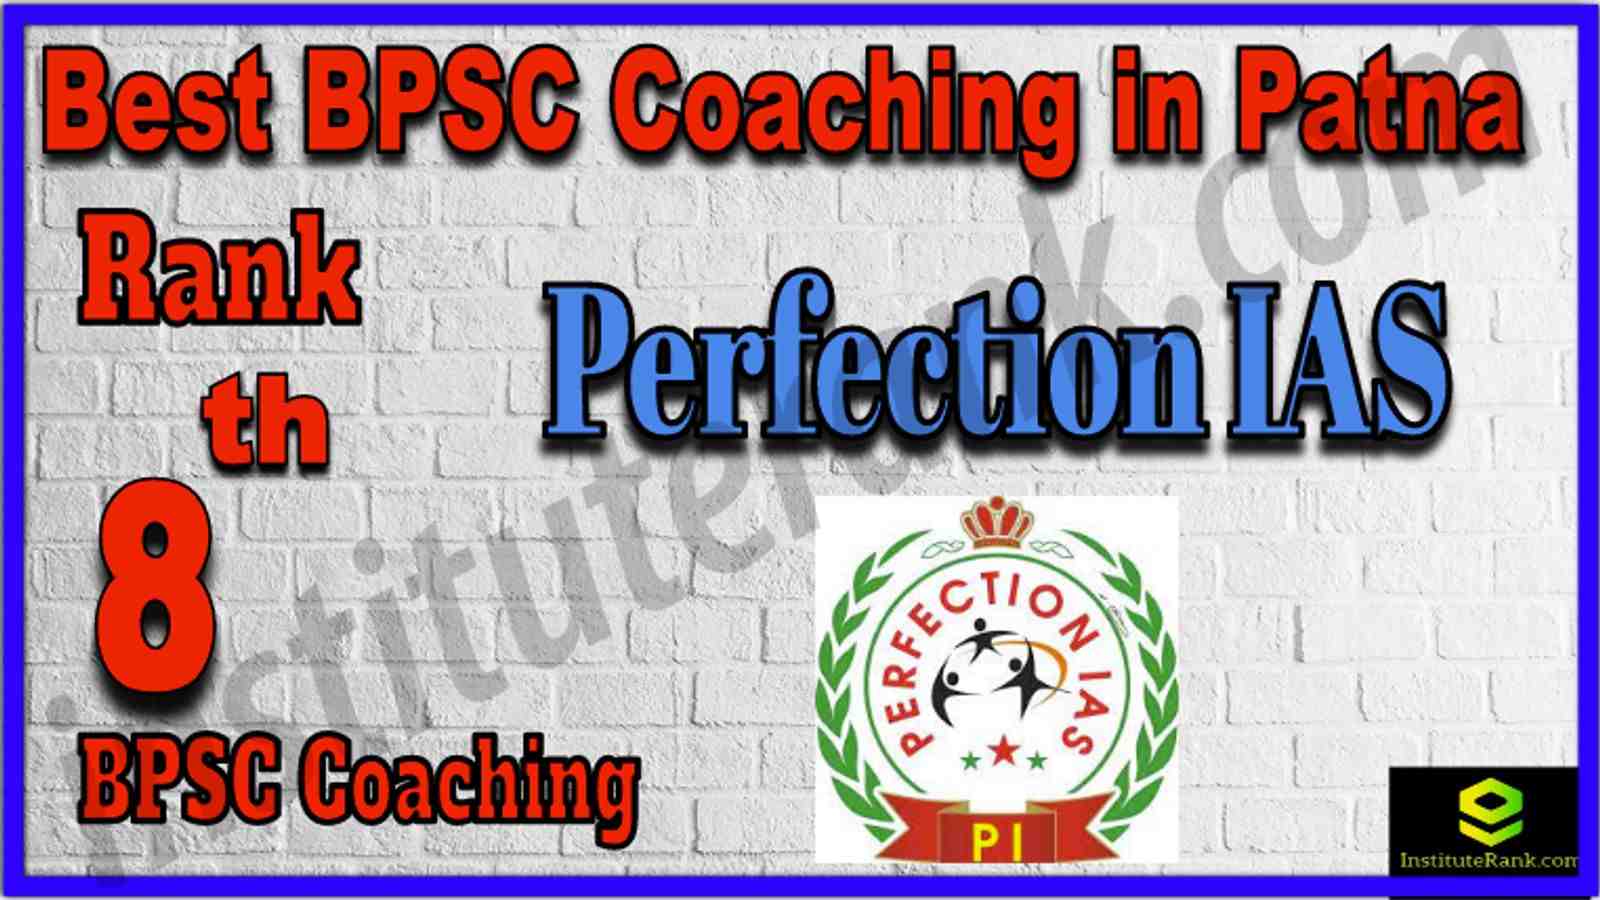 Best BPSC Coaching in Patna Rank 8th